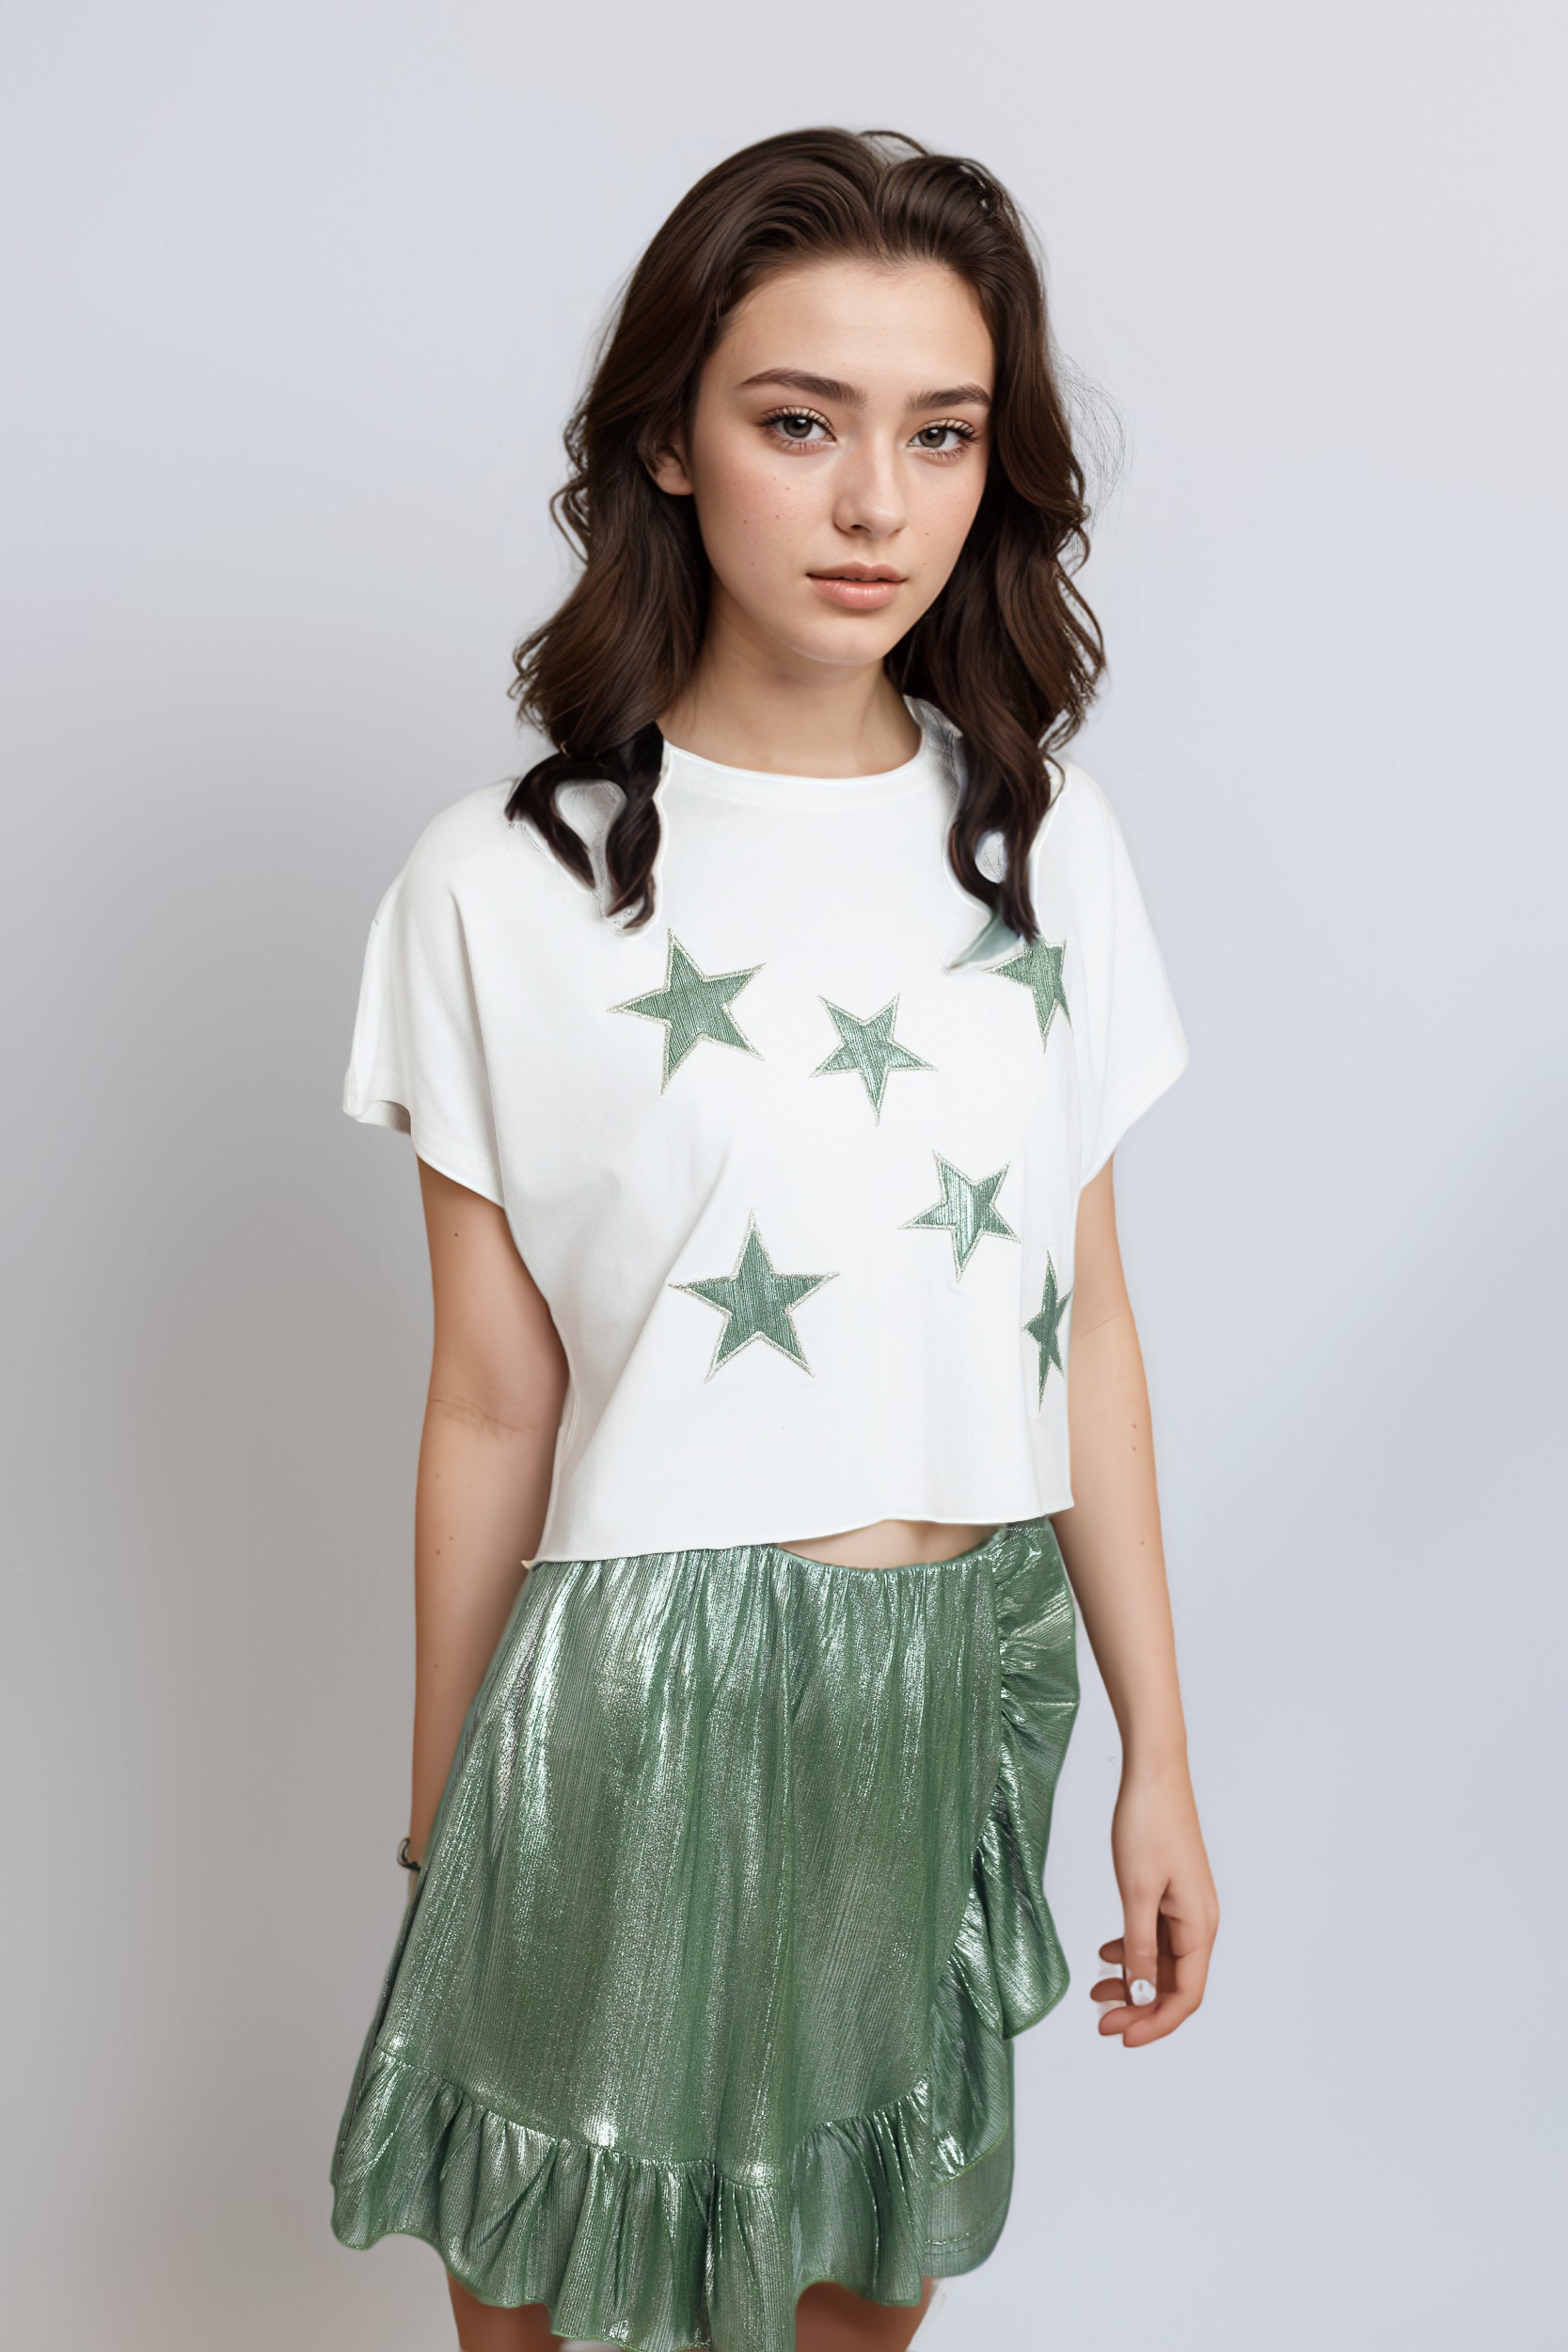 Shiny Star Top For Women - Off White